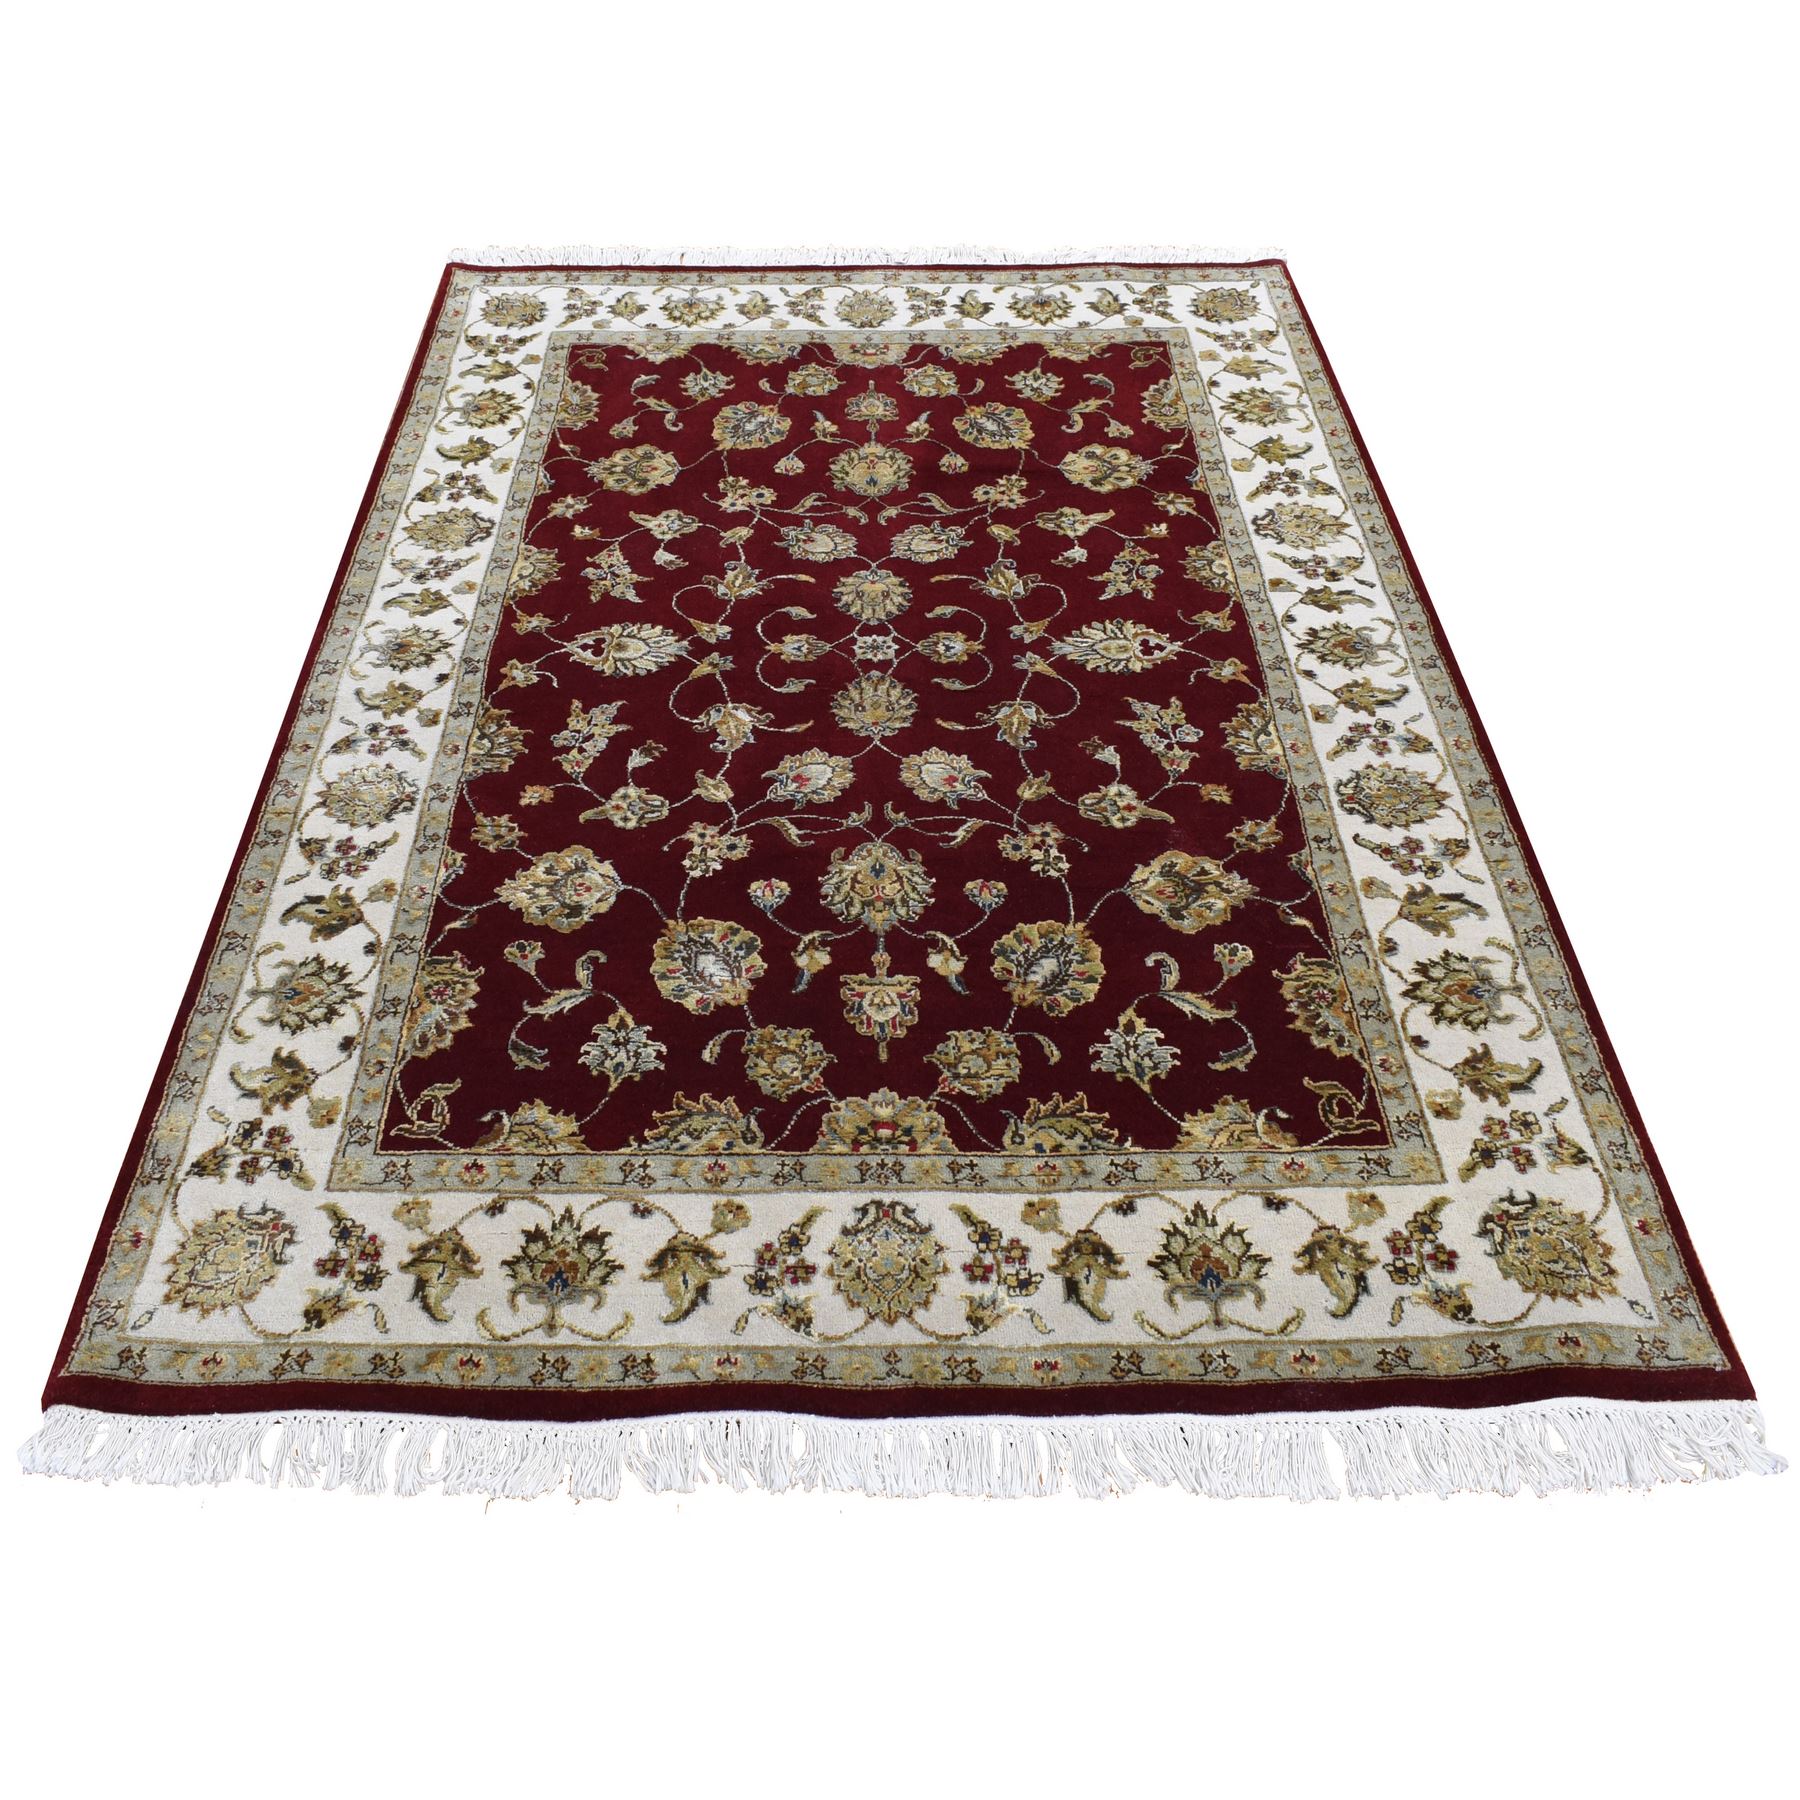 5'1"x7'1" Mahogany Red, Wool and Silk, Rajasthan Design, Hand Woven, Oriental Rug 